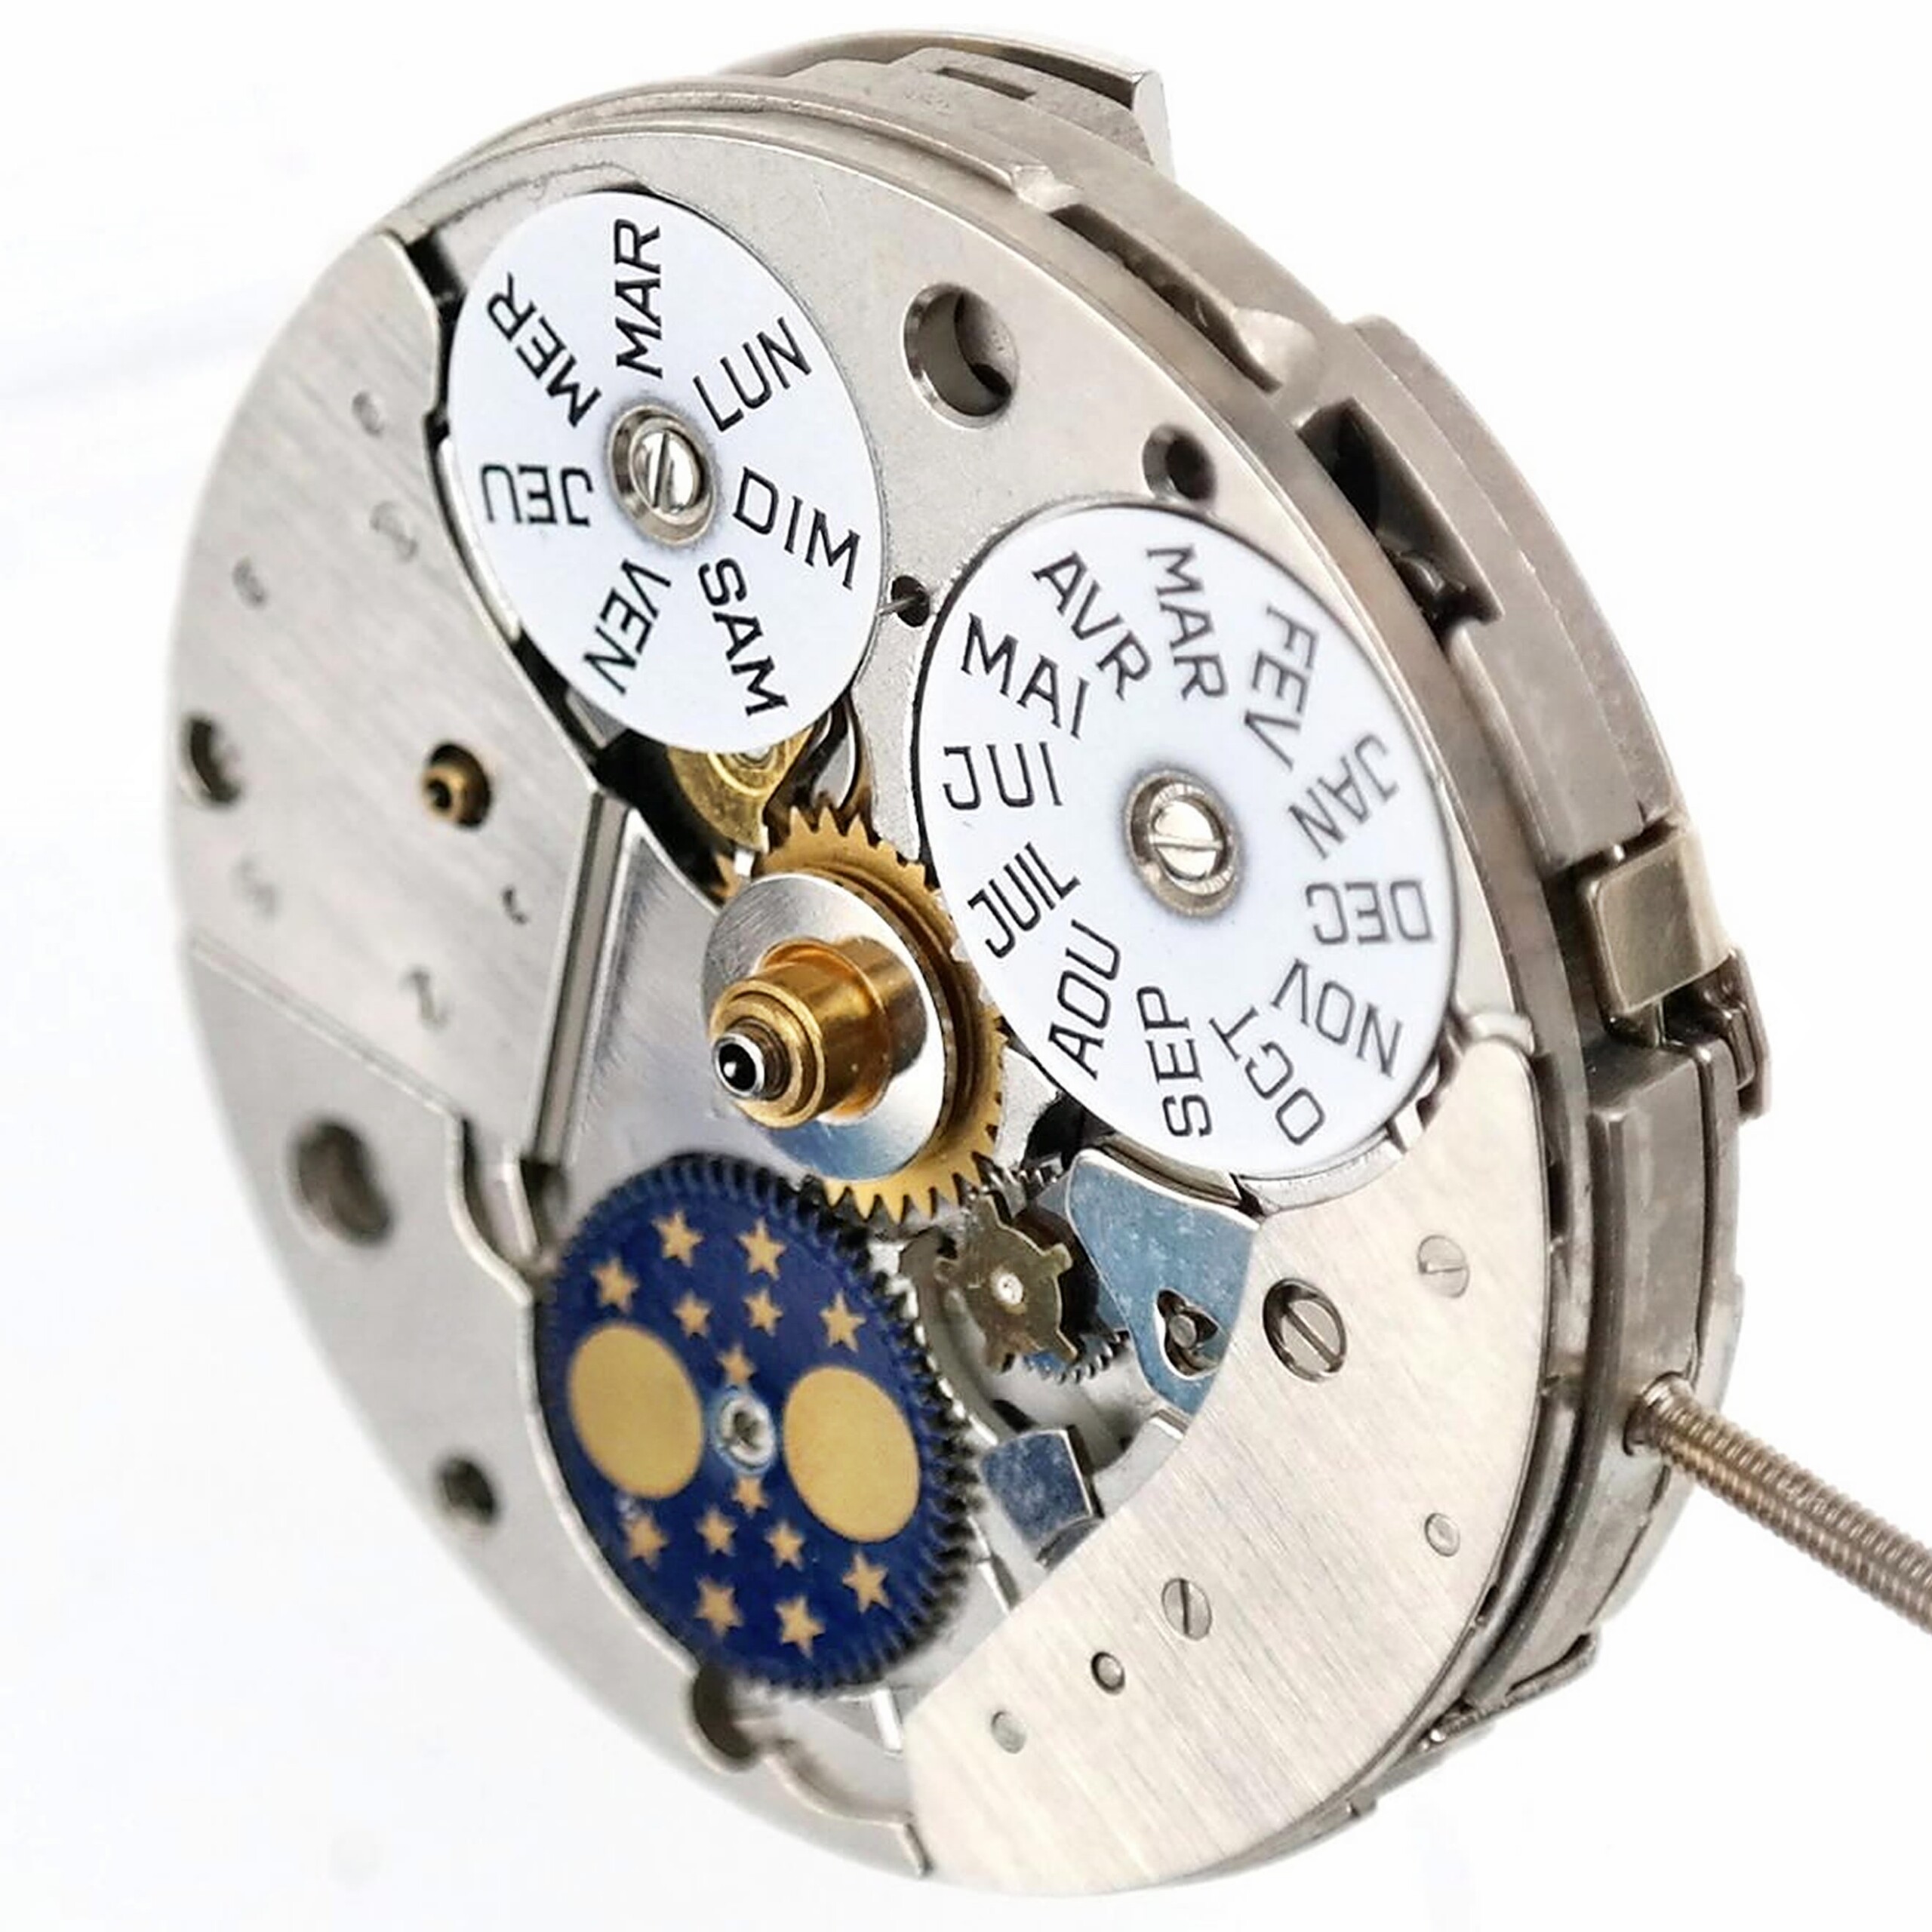 Valjoux 7751 - Automatic Chronograph Triple Date w. Moon-Phases Watch Movement